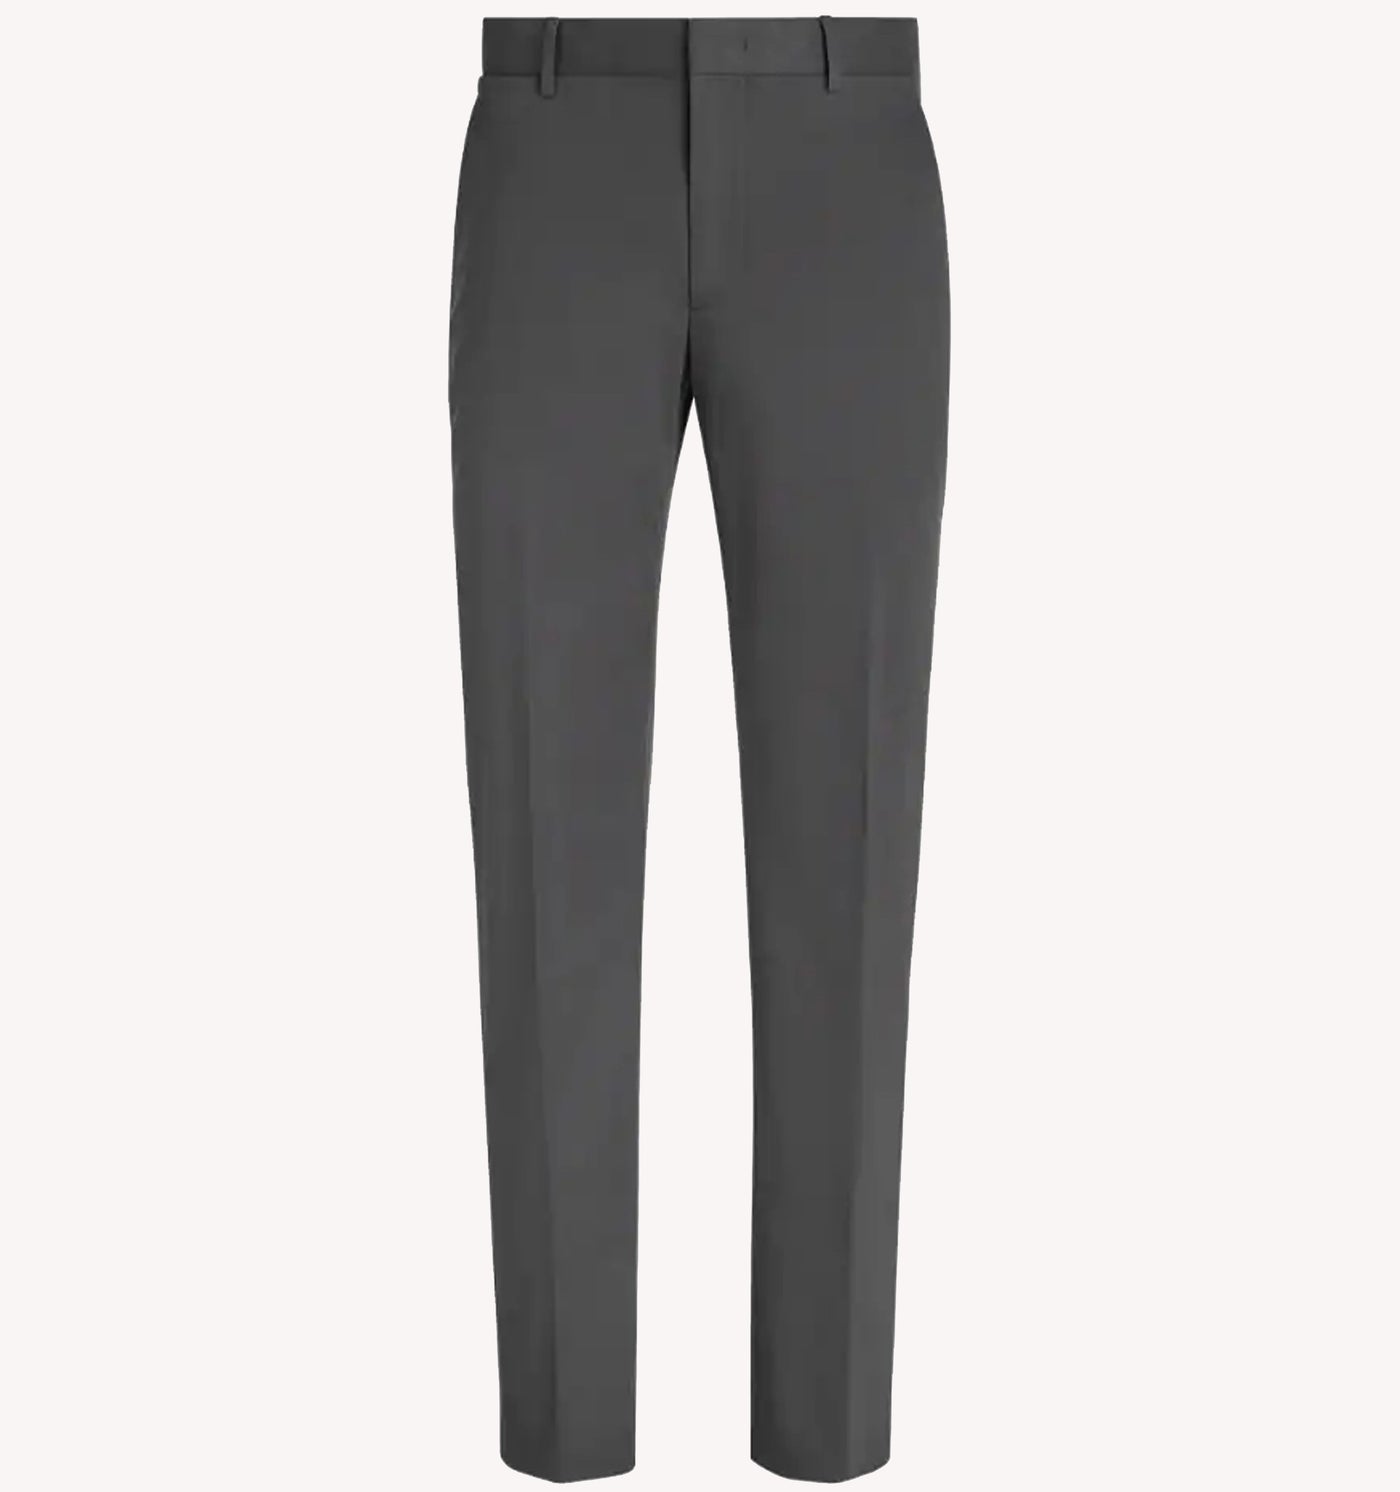 Zegna Sport Trousers in Charcoal